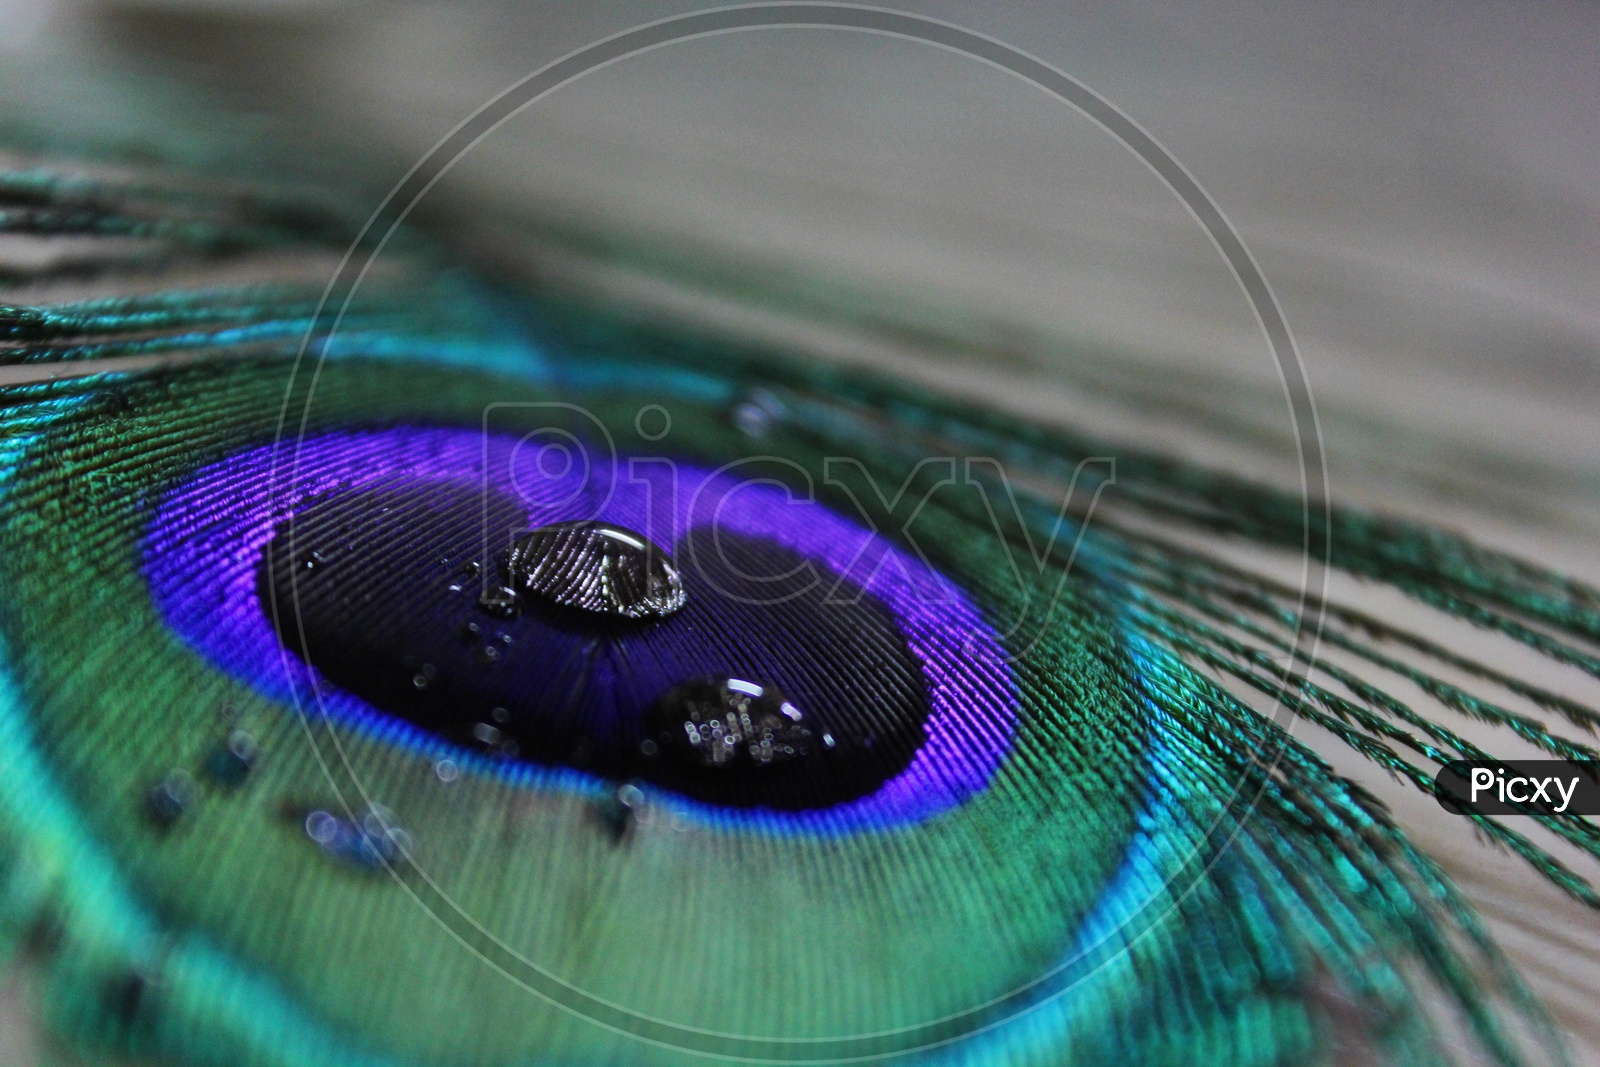 Close up of a peacock feather